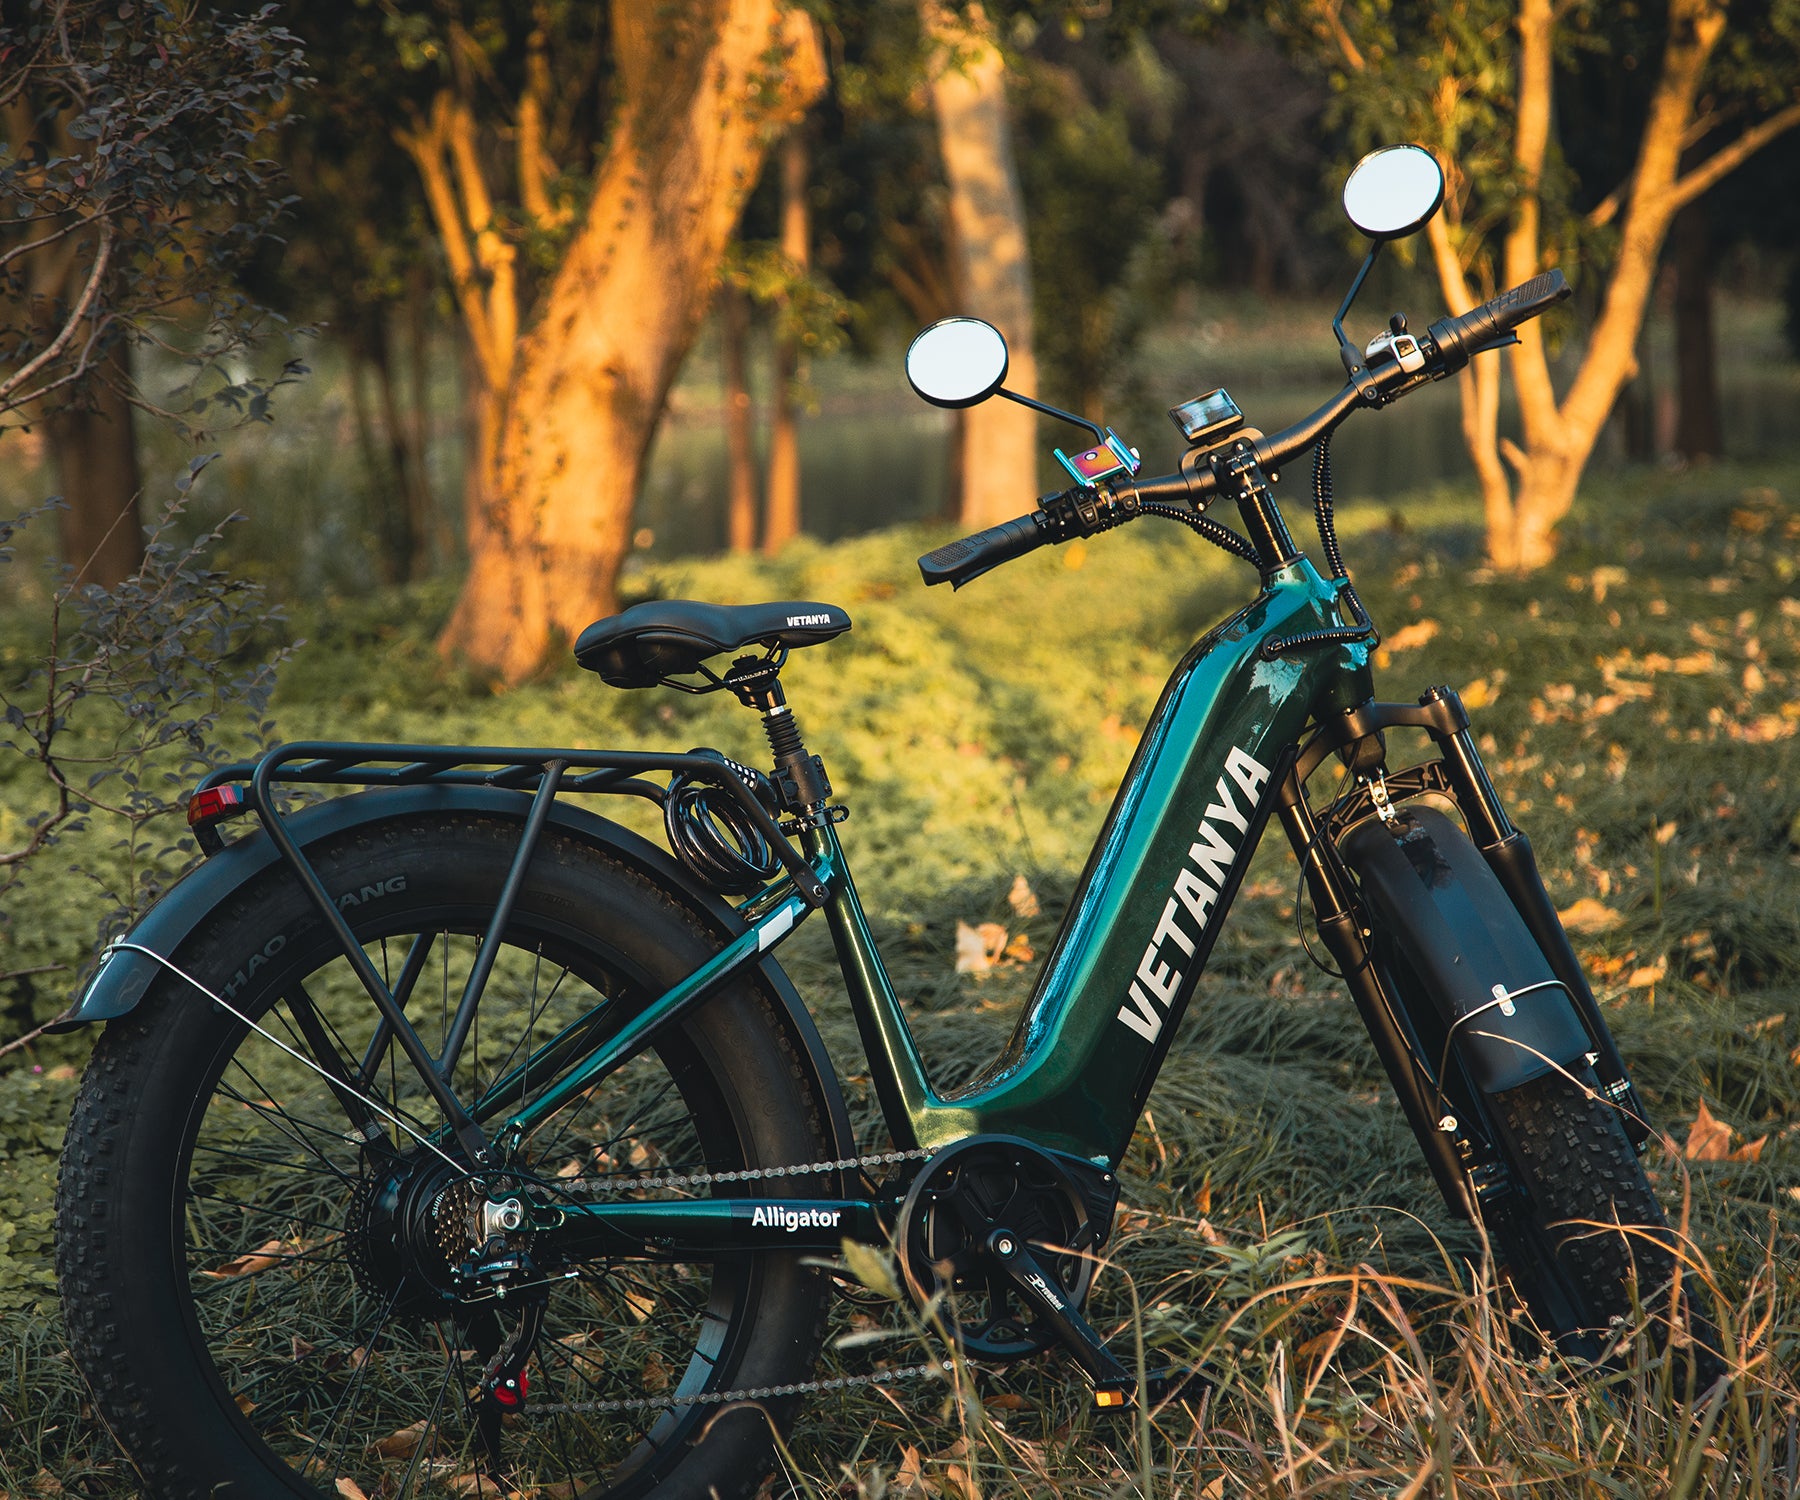 Still thinking about the right e-bike for commute?